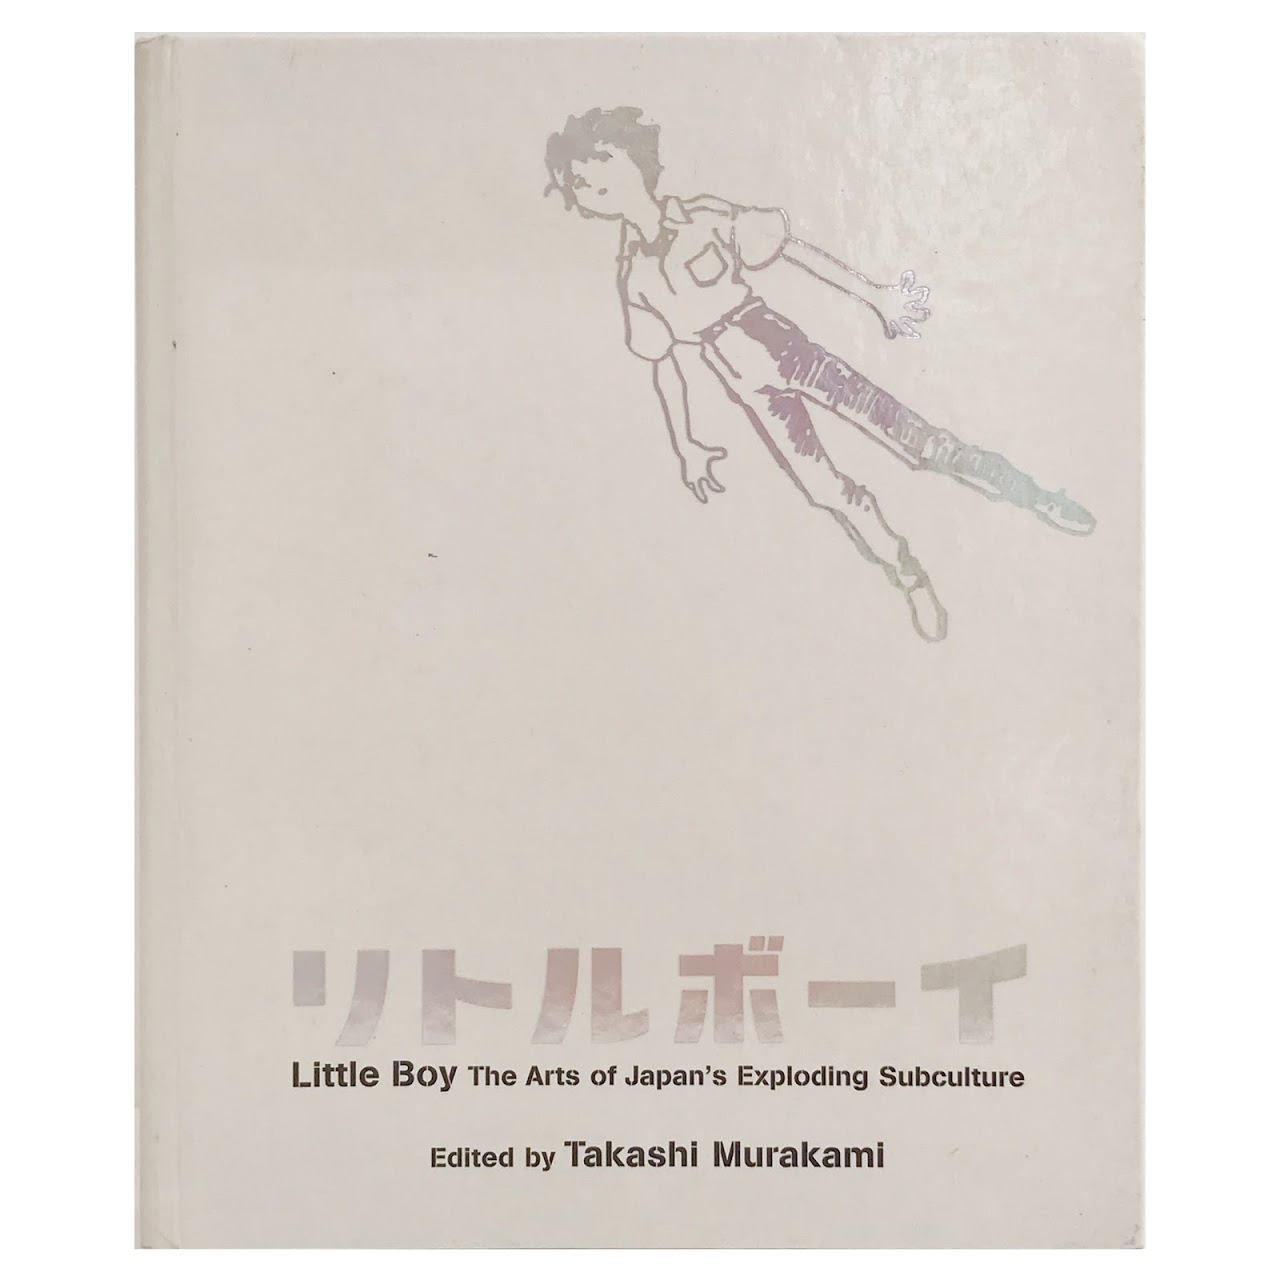 Takashi Murakami SIGNED 'LITTLE BOY The Arts of Japan's Exploding Subculture' Book